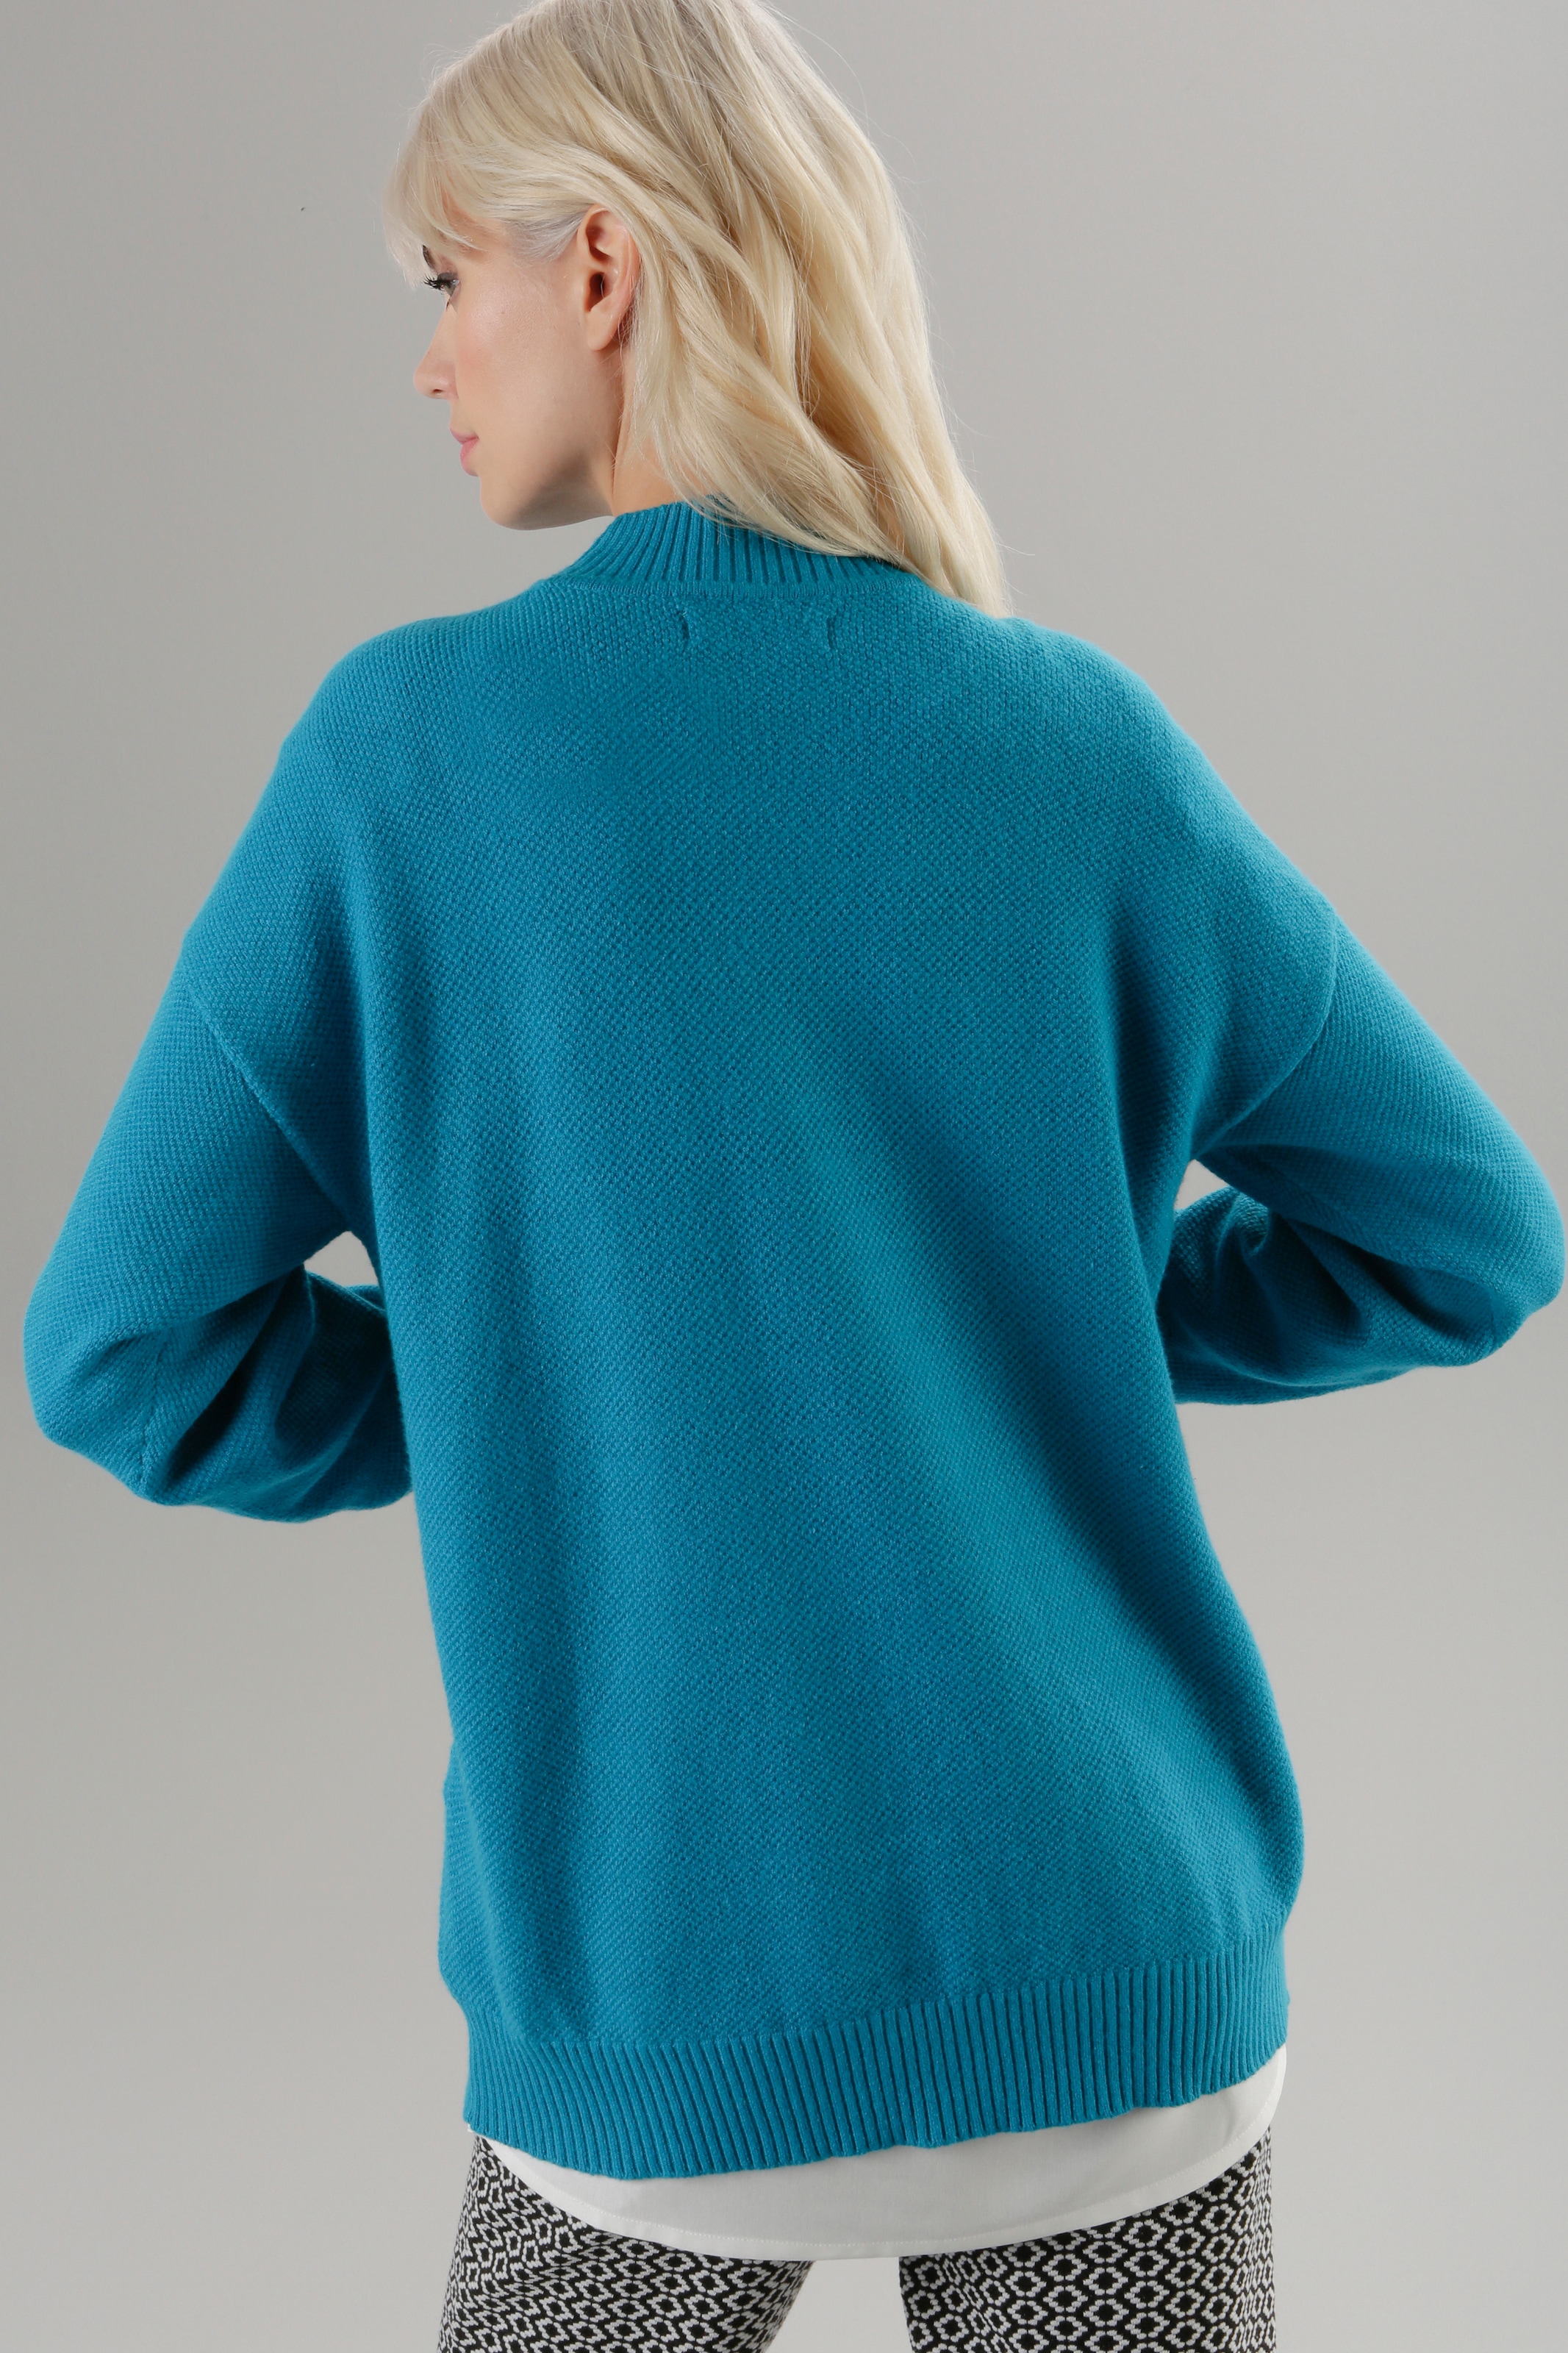 SELECTED online Aniston Perlfangmuster feinem Strickpullover, mit bei